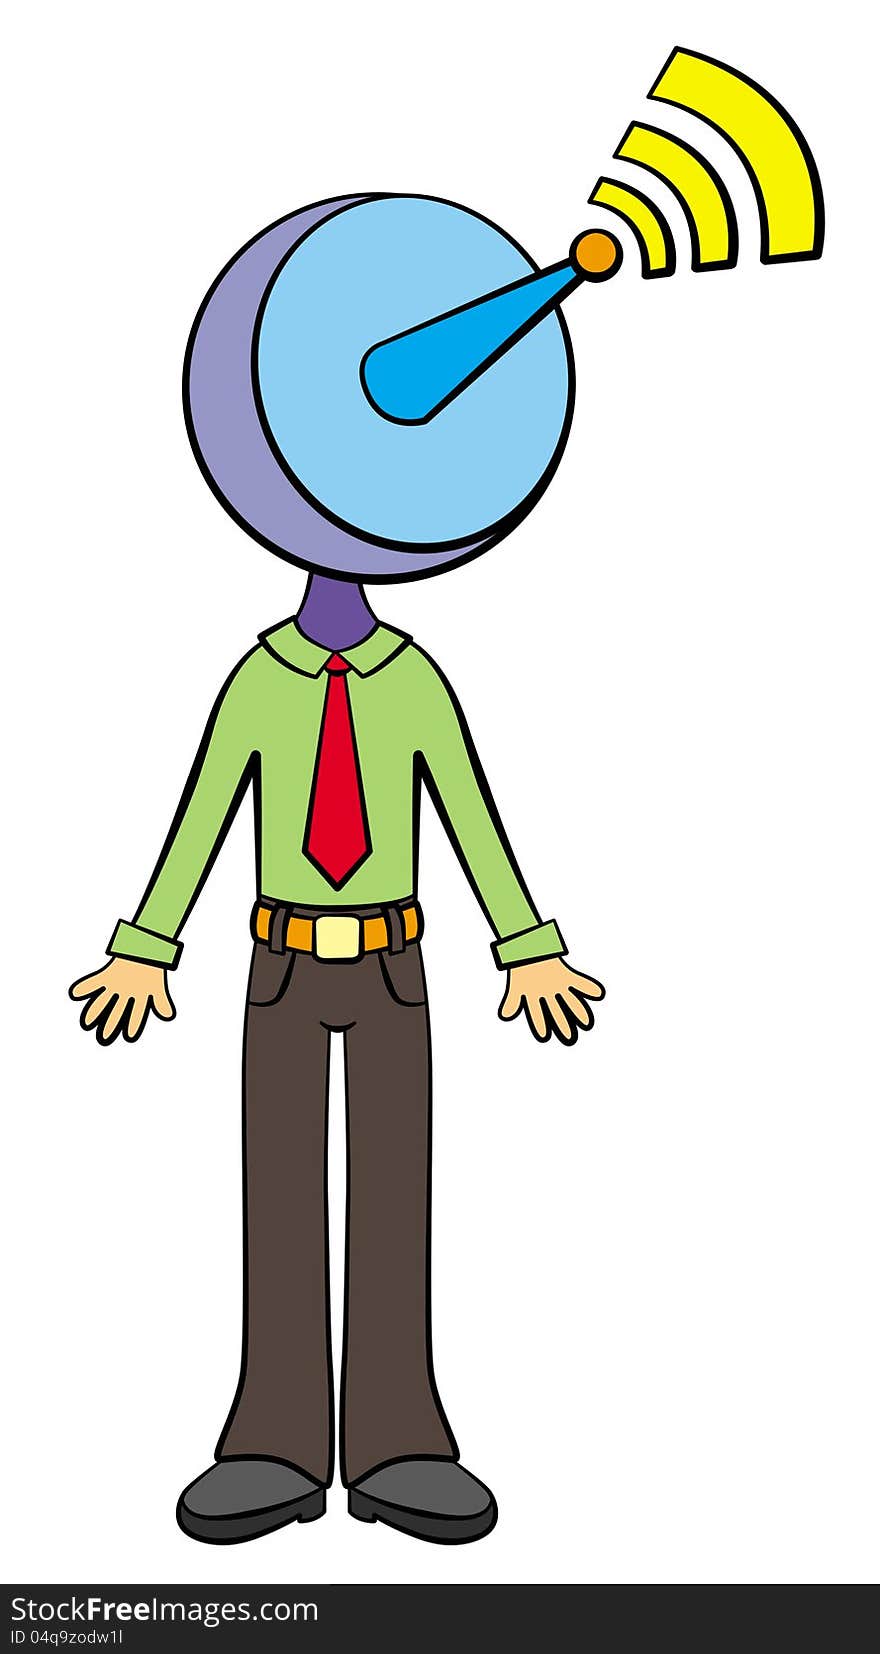 An illustration of a cartoon character dressed like a business man with a satellite head. An illustration of a cartoon character dressed like a business man with a satellite head